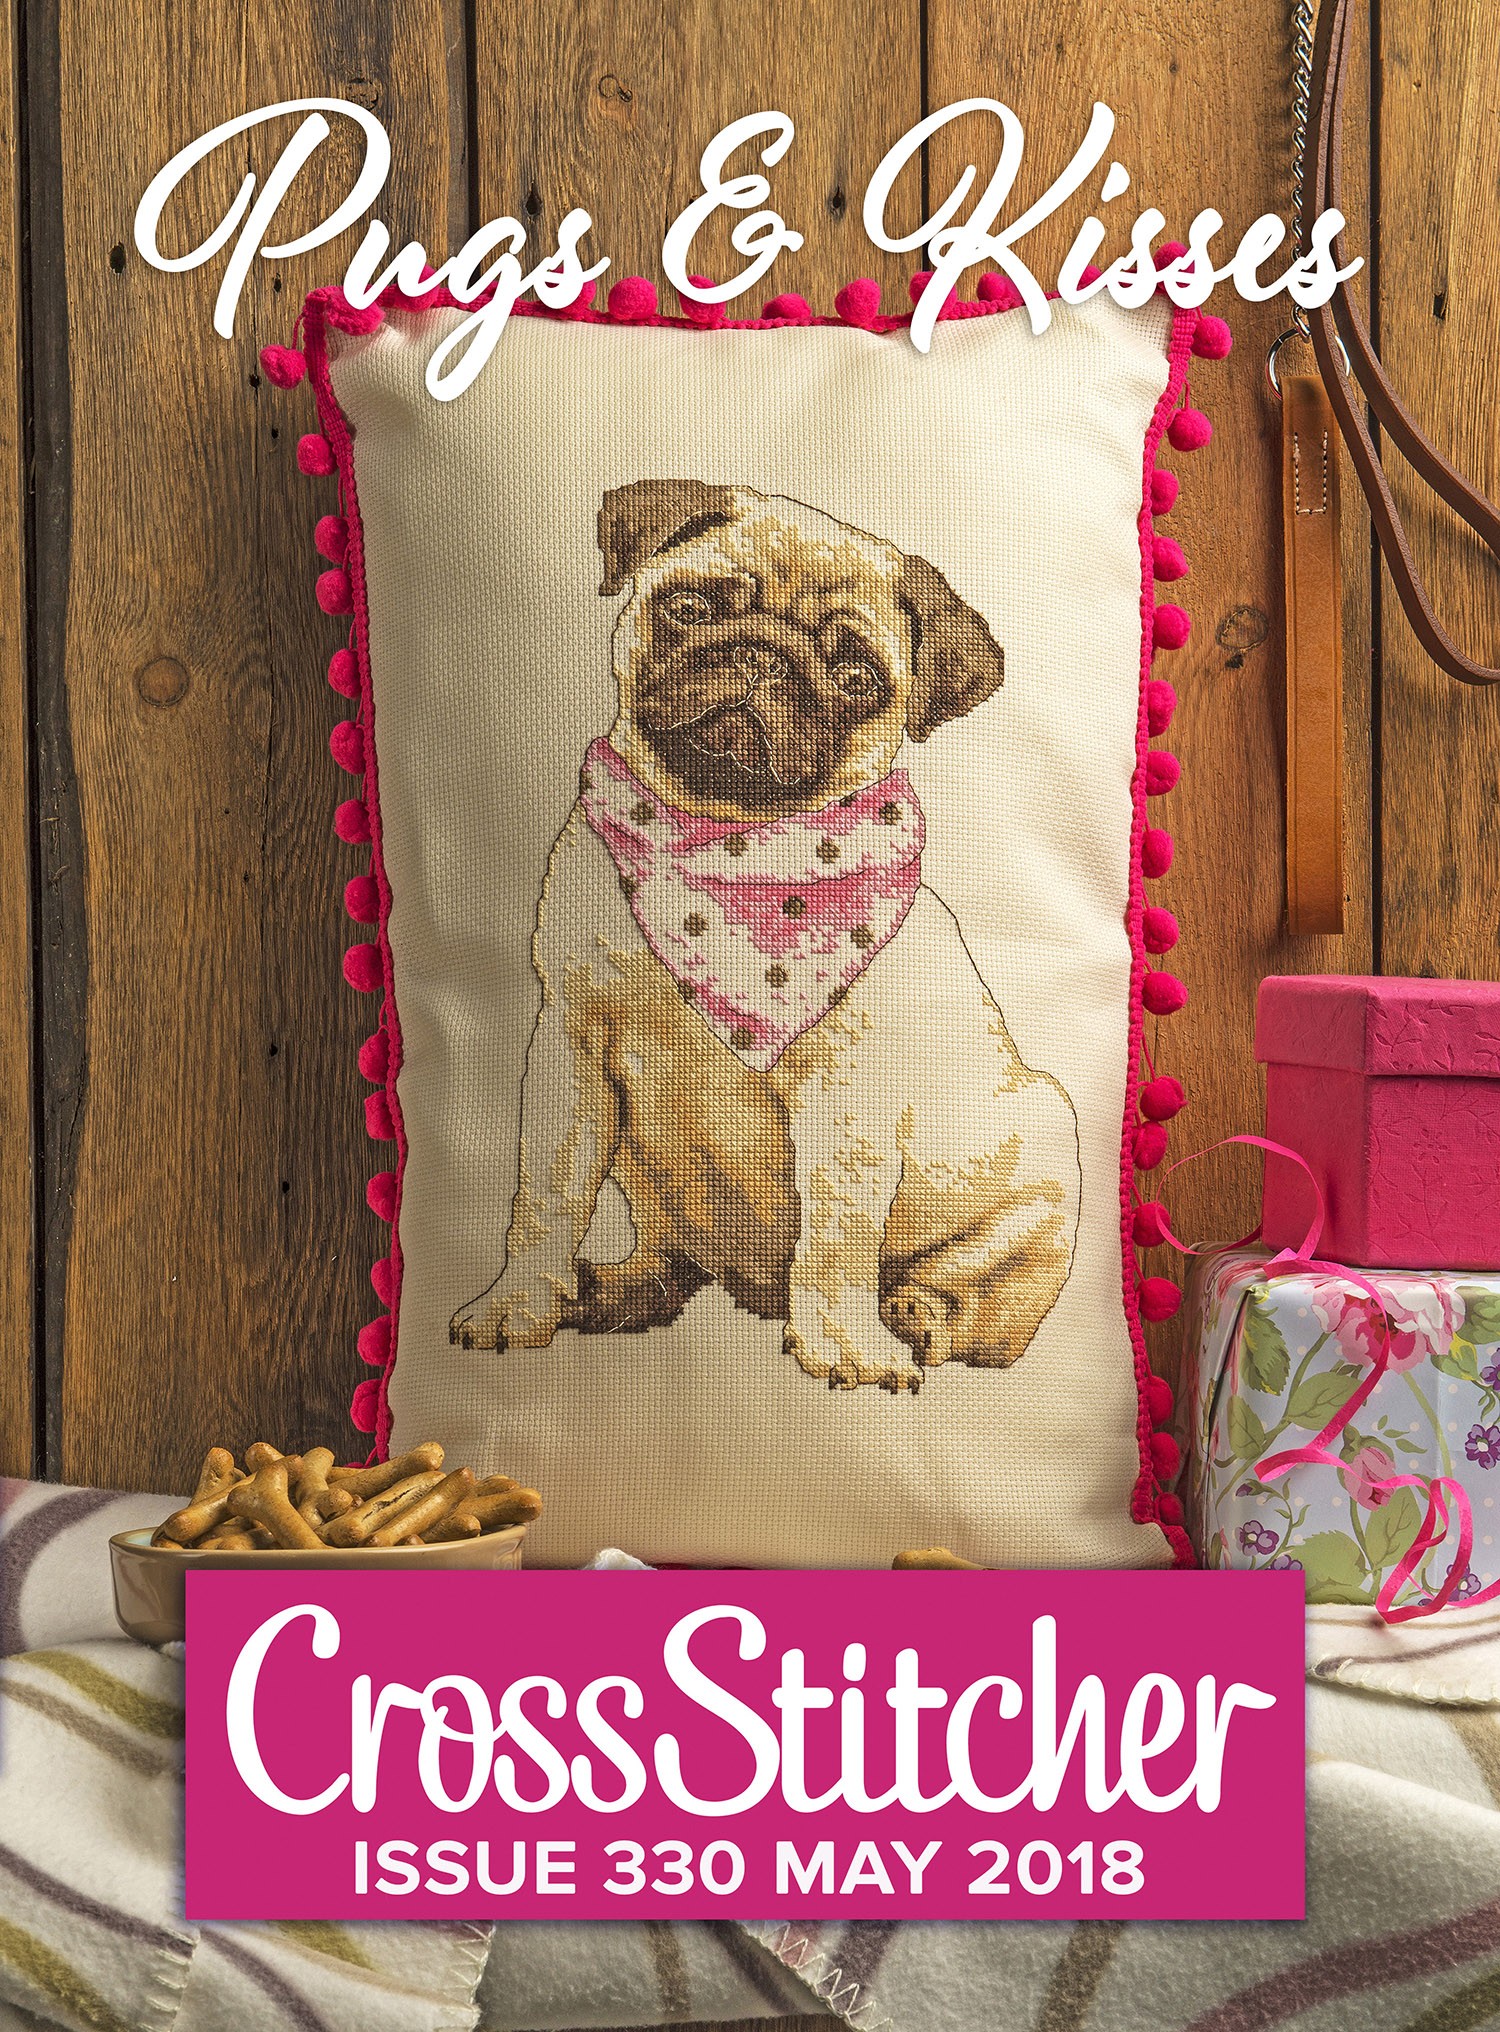 Cross Stitcher Project Pack - Pugs & Kisses Issue 330